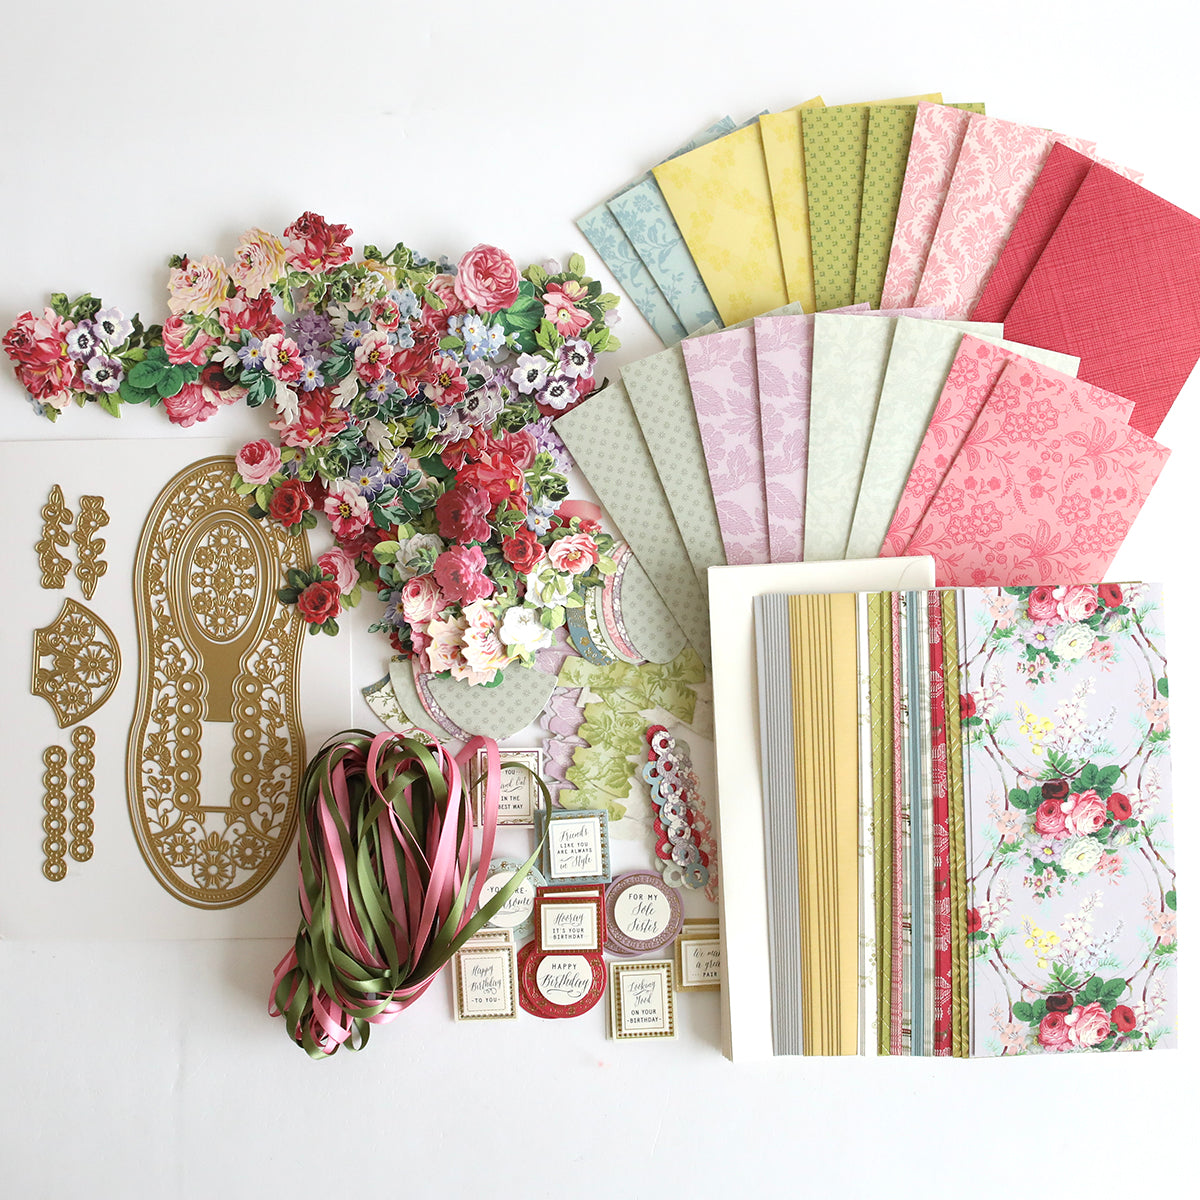 An assortment of 2024 Finishing School Craft Box Autoship materials including patterned papers, floral embellishments, stickers, and paper shoes laid out on a white surface.